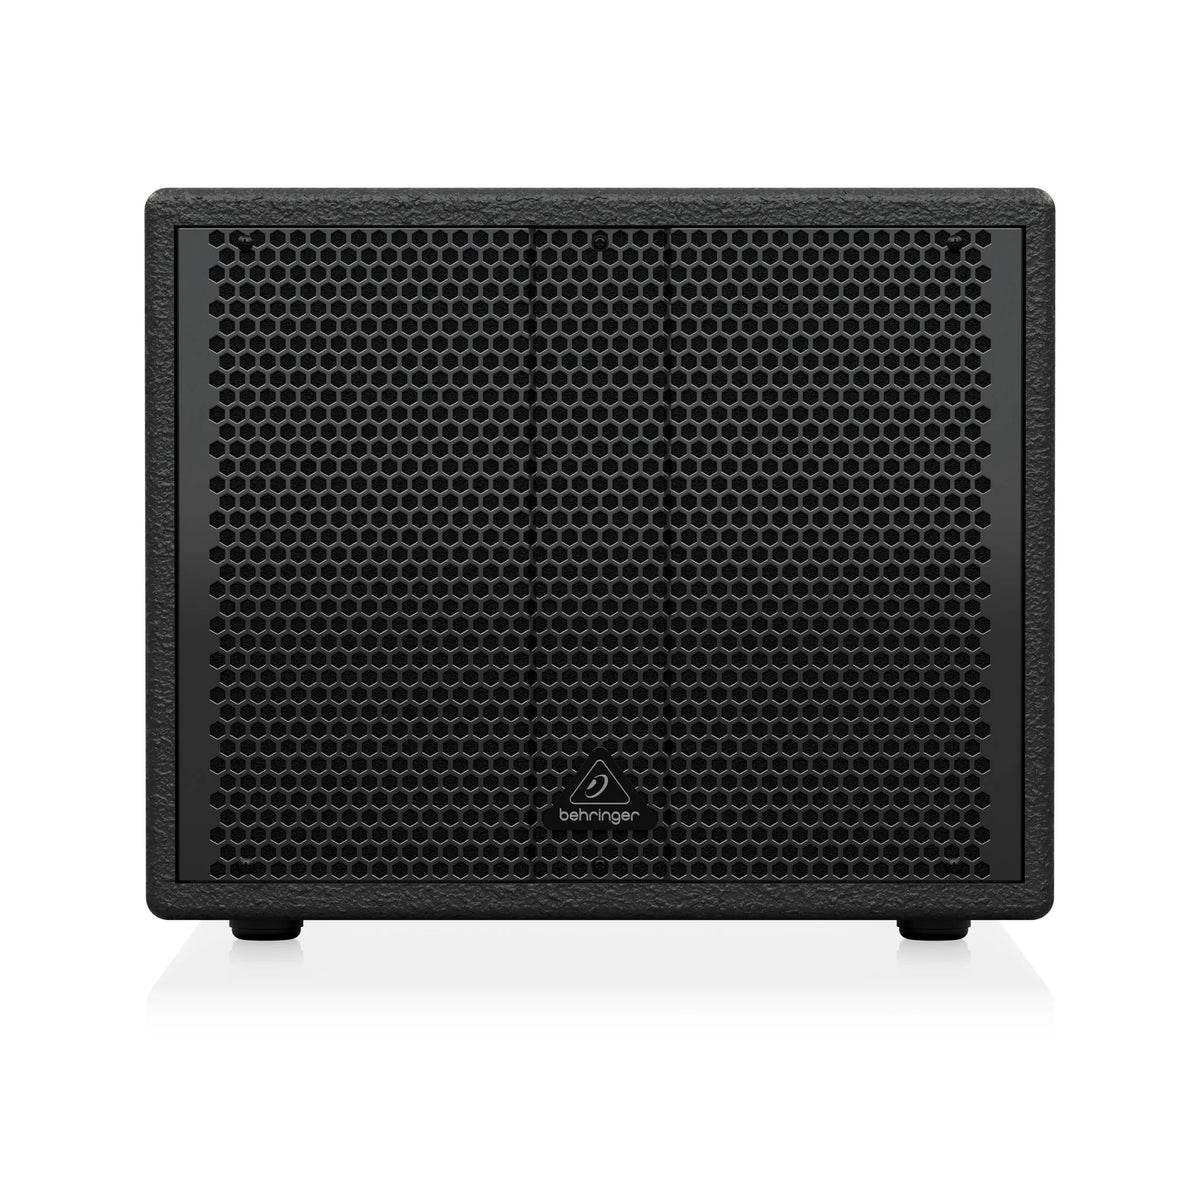 Behringer SAT 1008 SUBA Active 360W 8" PA Subwoofer with Built-In Stereo Crossover   